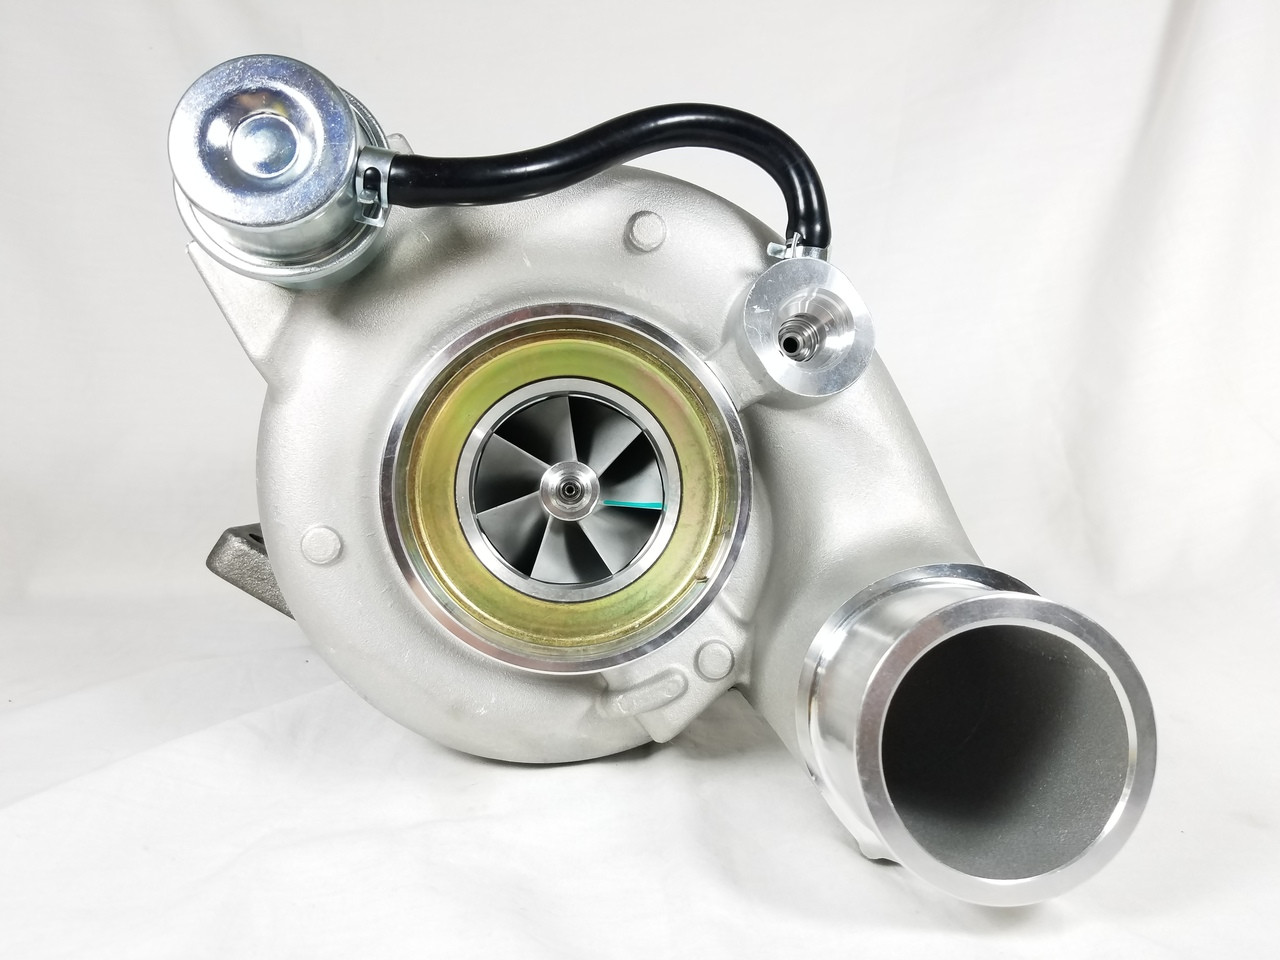 HE351CW 4043600 OE-Replacement Turbocharger